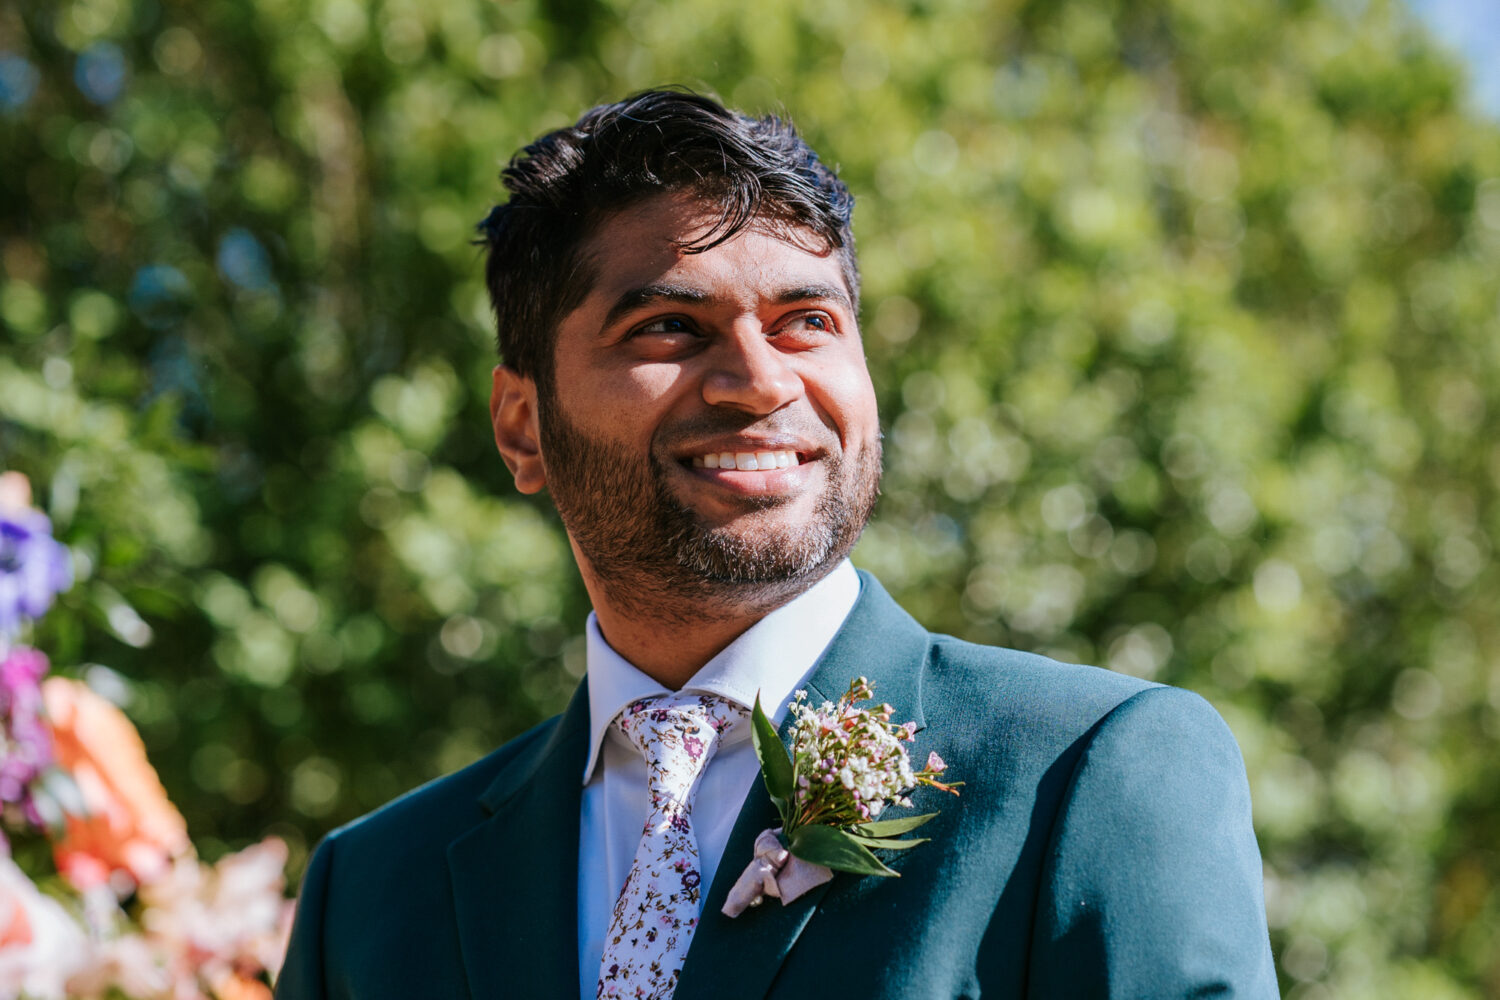 groom smiling while seeing bride walk down the aisle